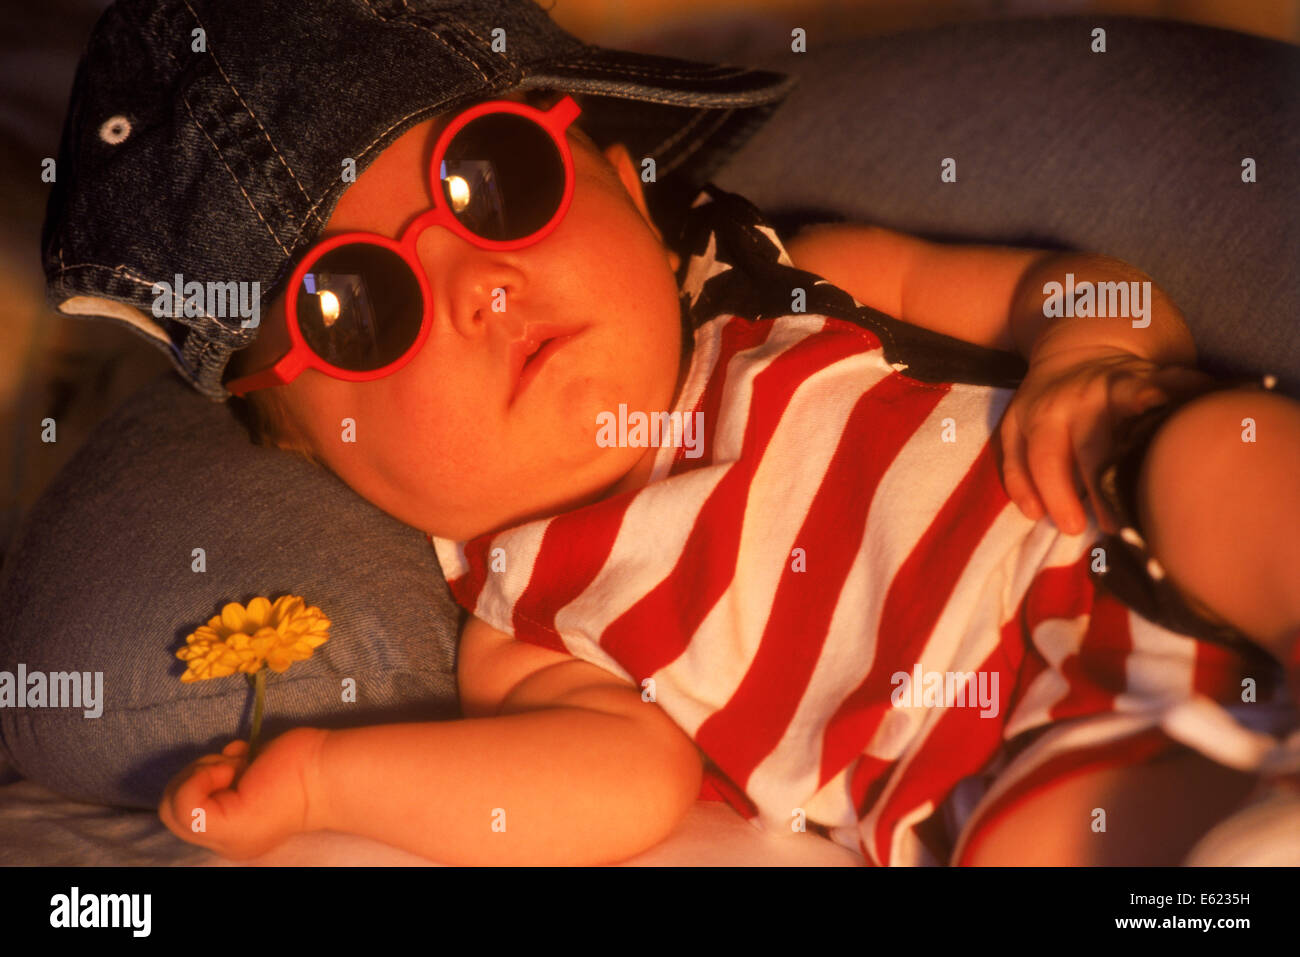 Baby sleeping in outfit that says made in America Stock Photo